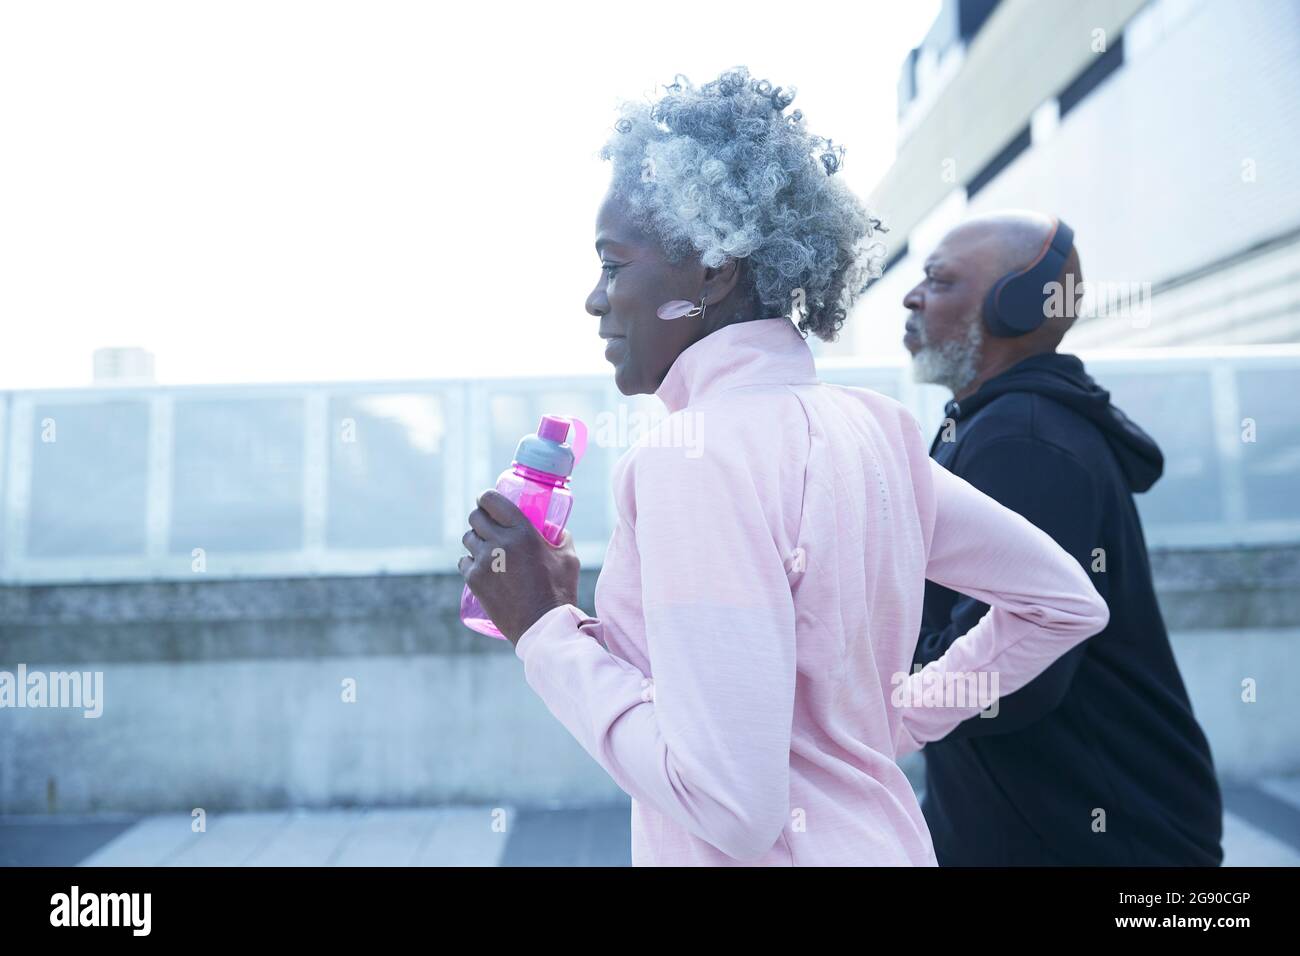 Senior woman holding water bottle while running with mature man Stock Photo